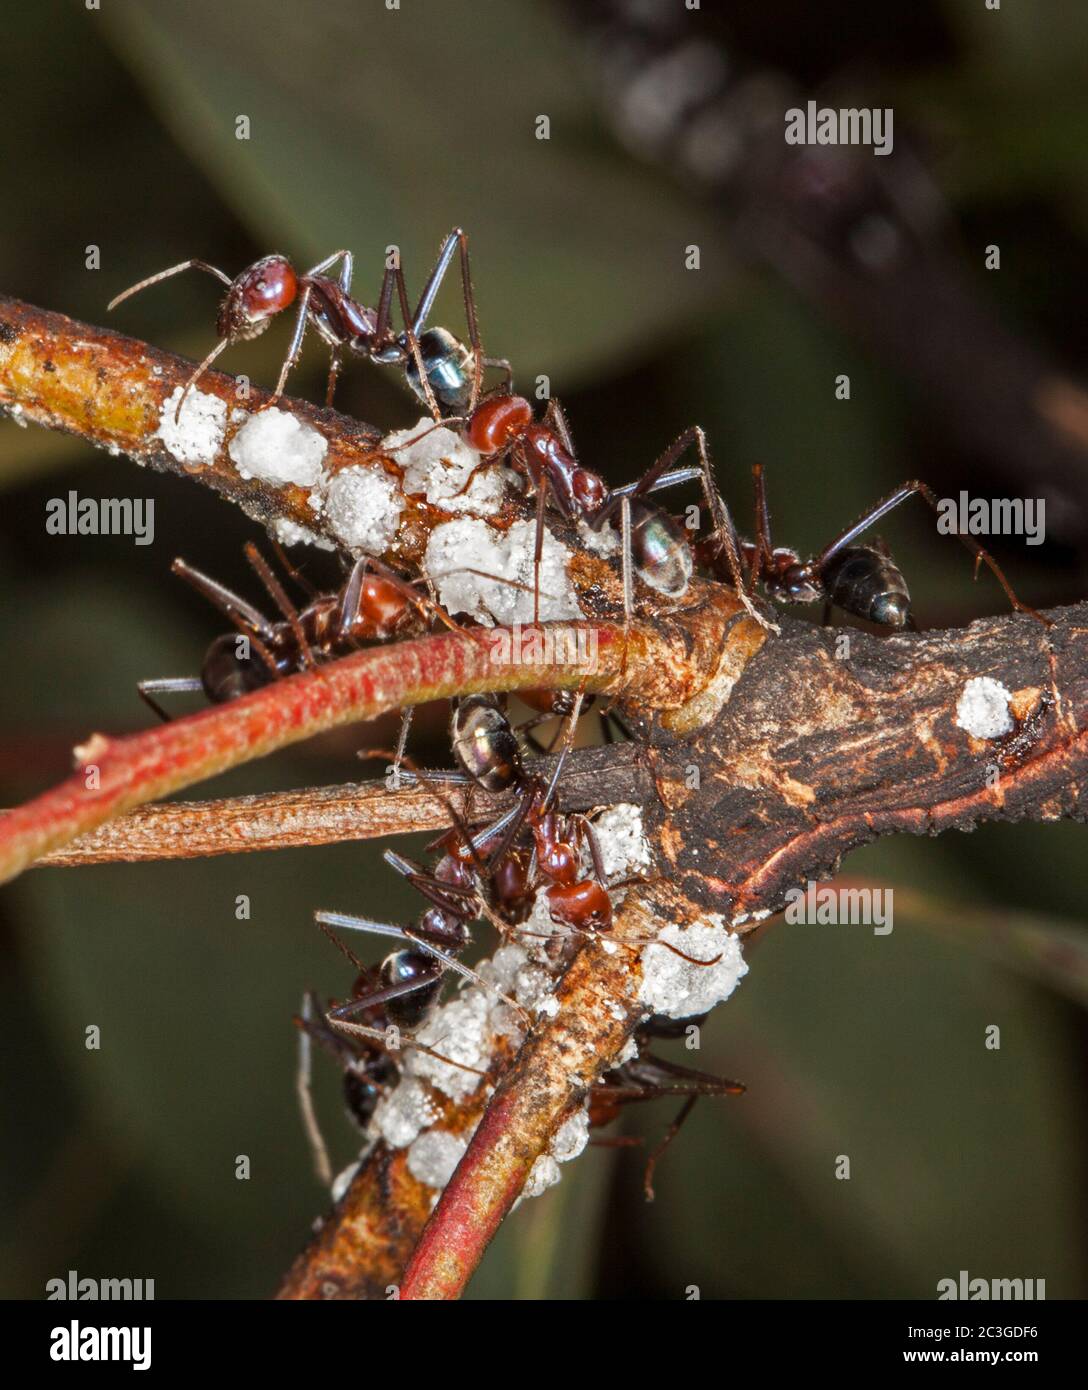 Large red and black ants feeding on scale insects on branch of shrub against dark green background Stock Photo